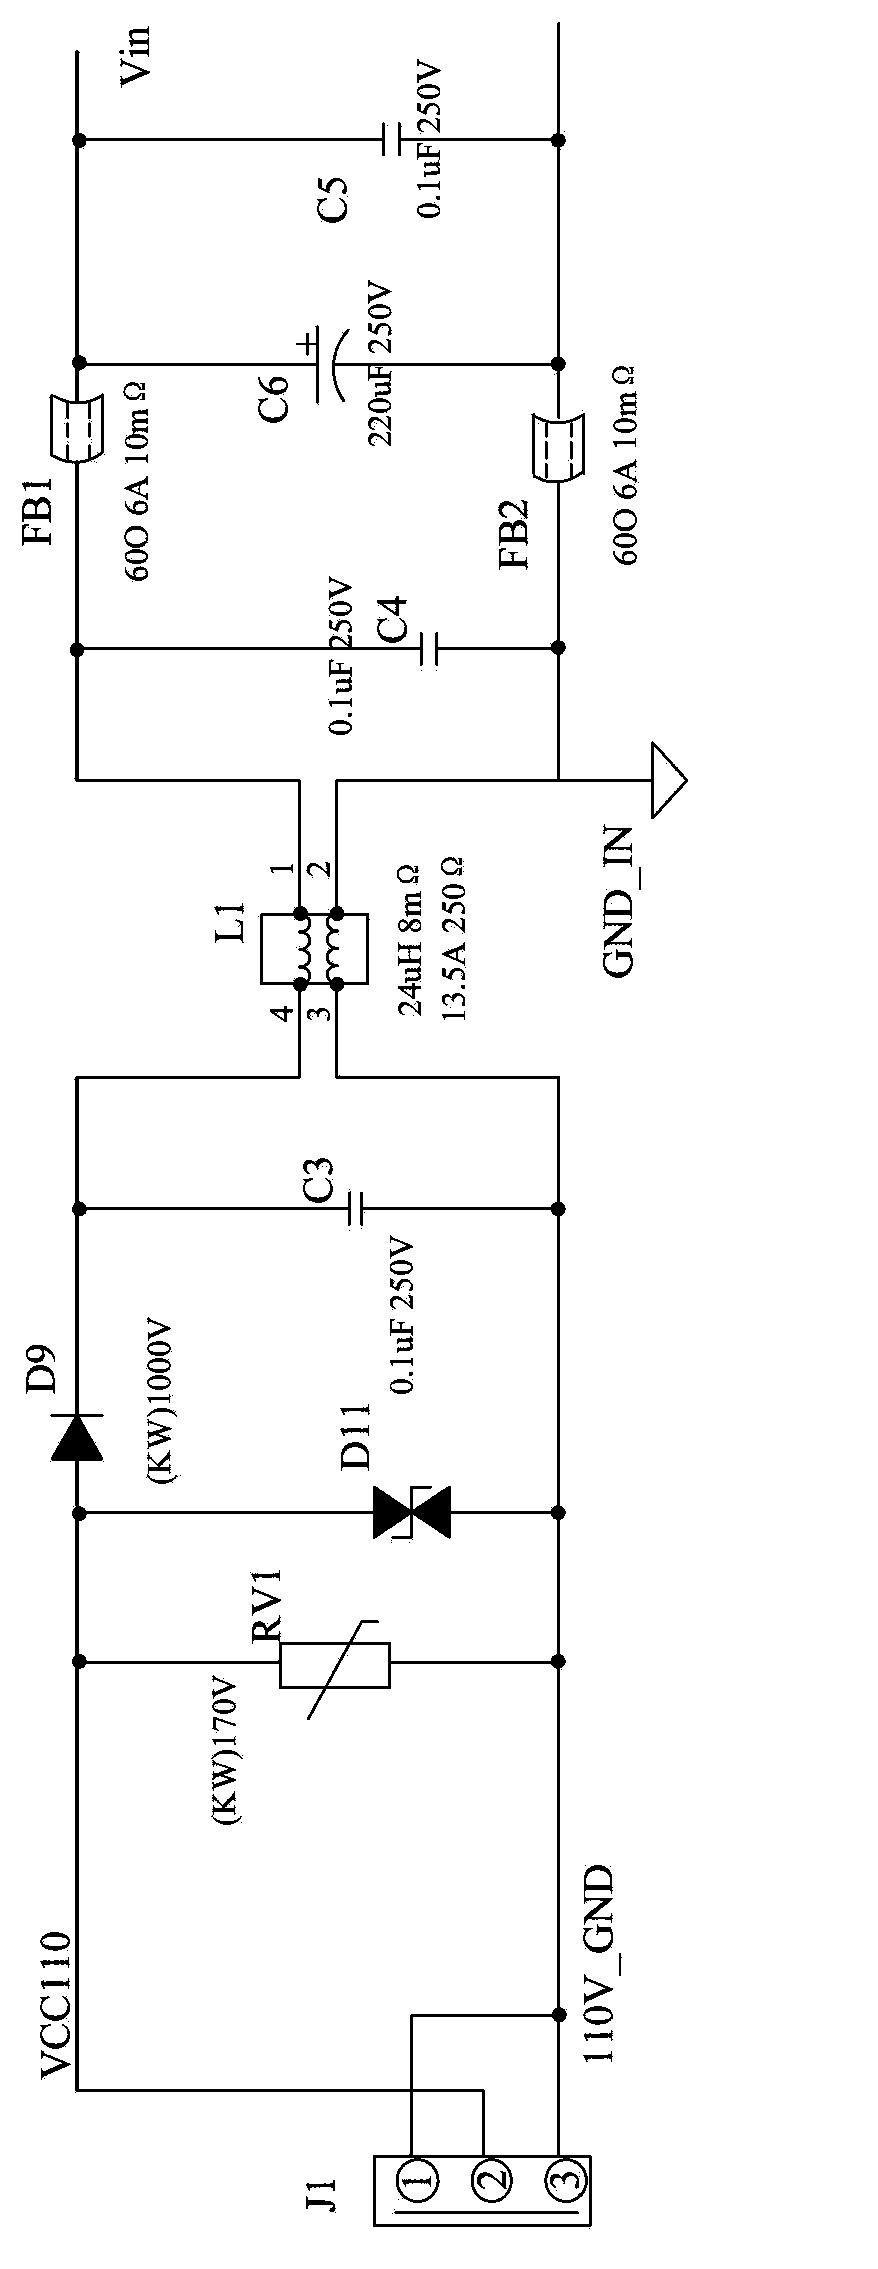 Power supply design circuit with high-level EMC and safety regulation performance